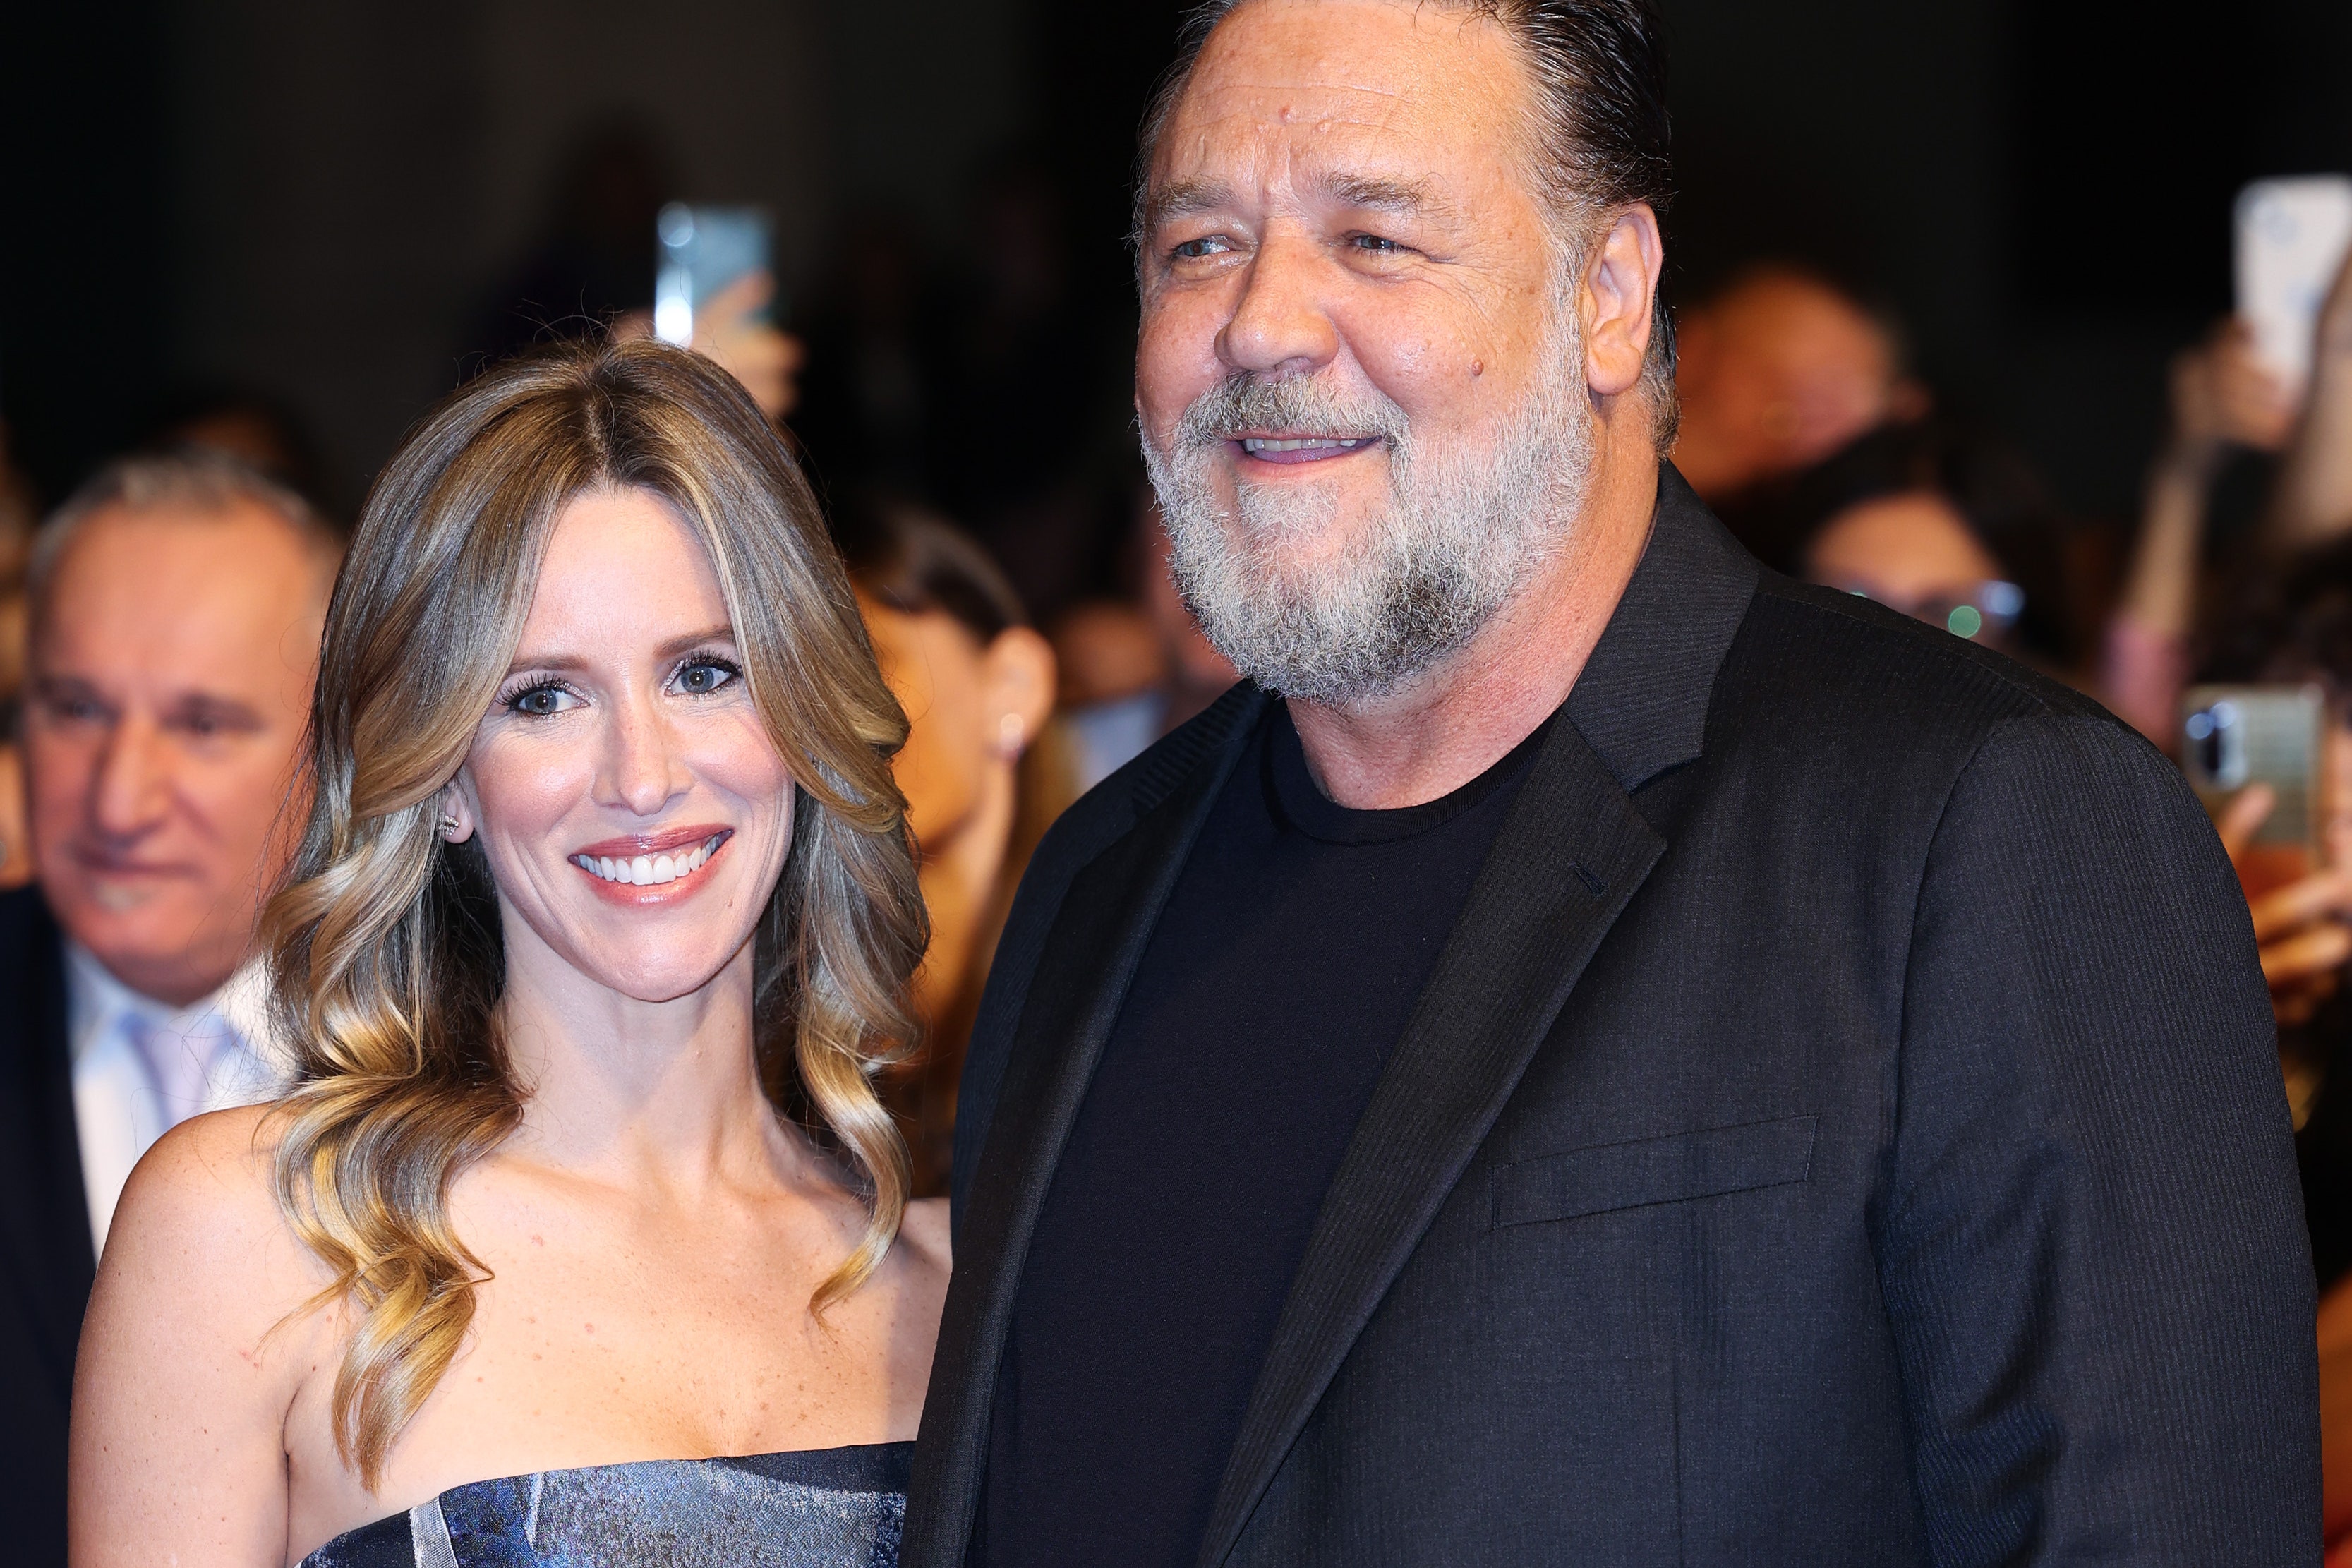 Russell Crowe, premier tapis rouge à Rome avec sa compagne Britney Theriot